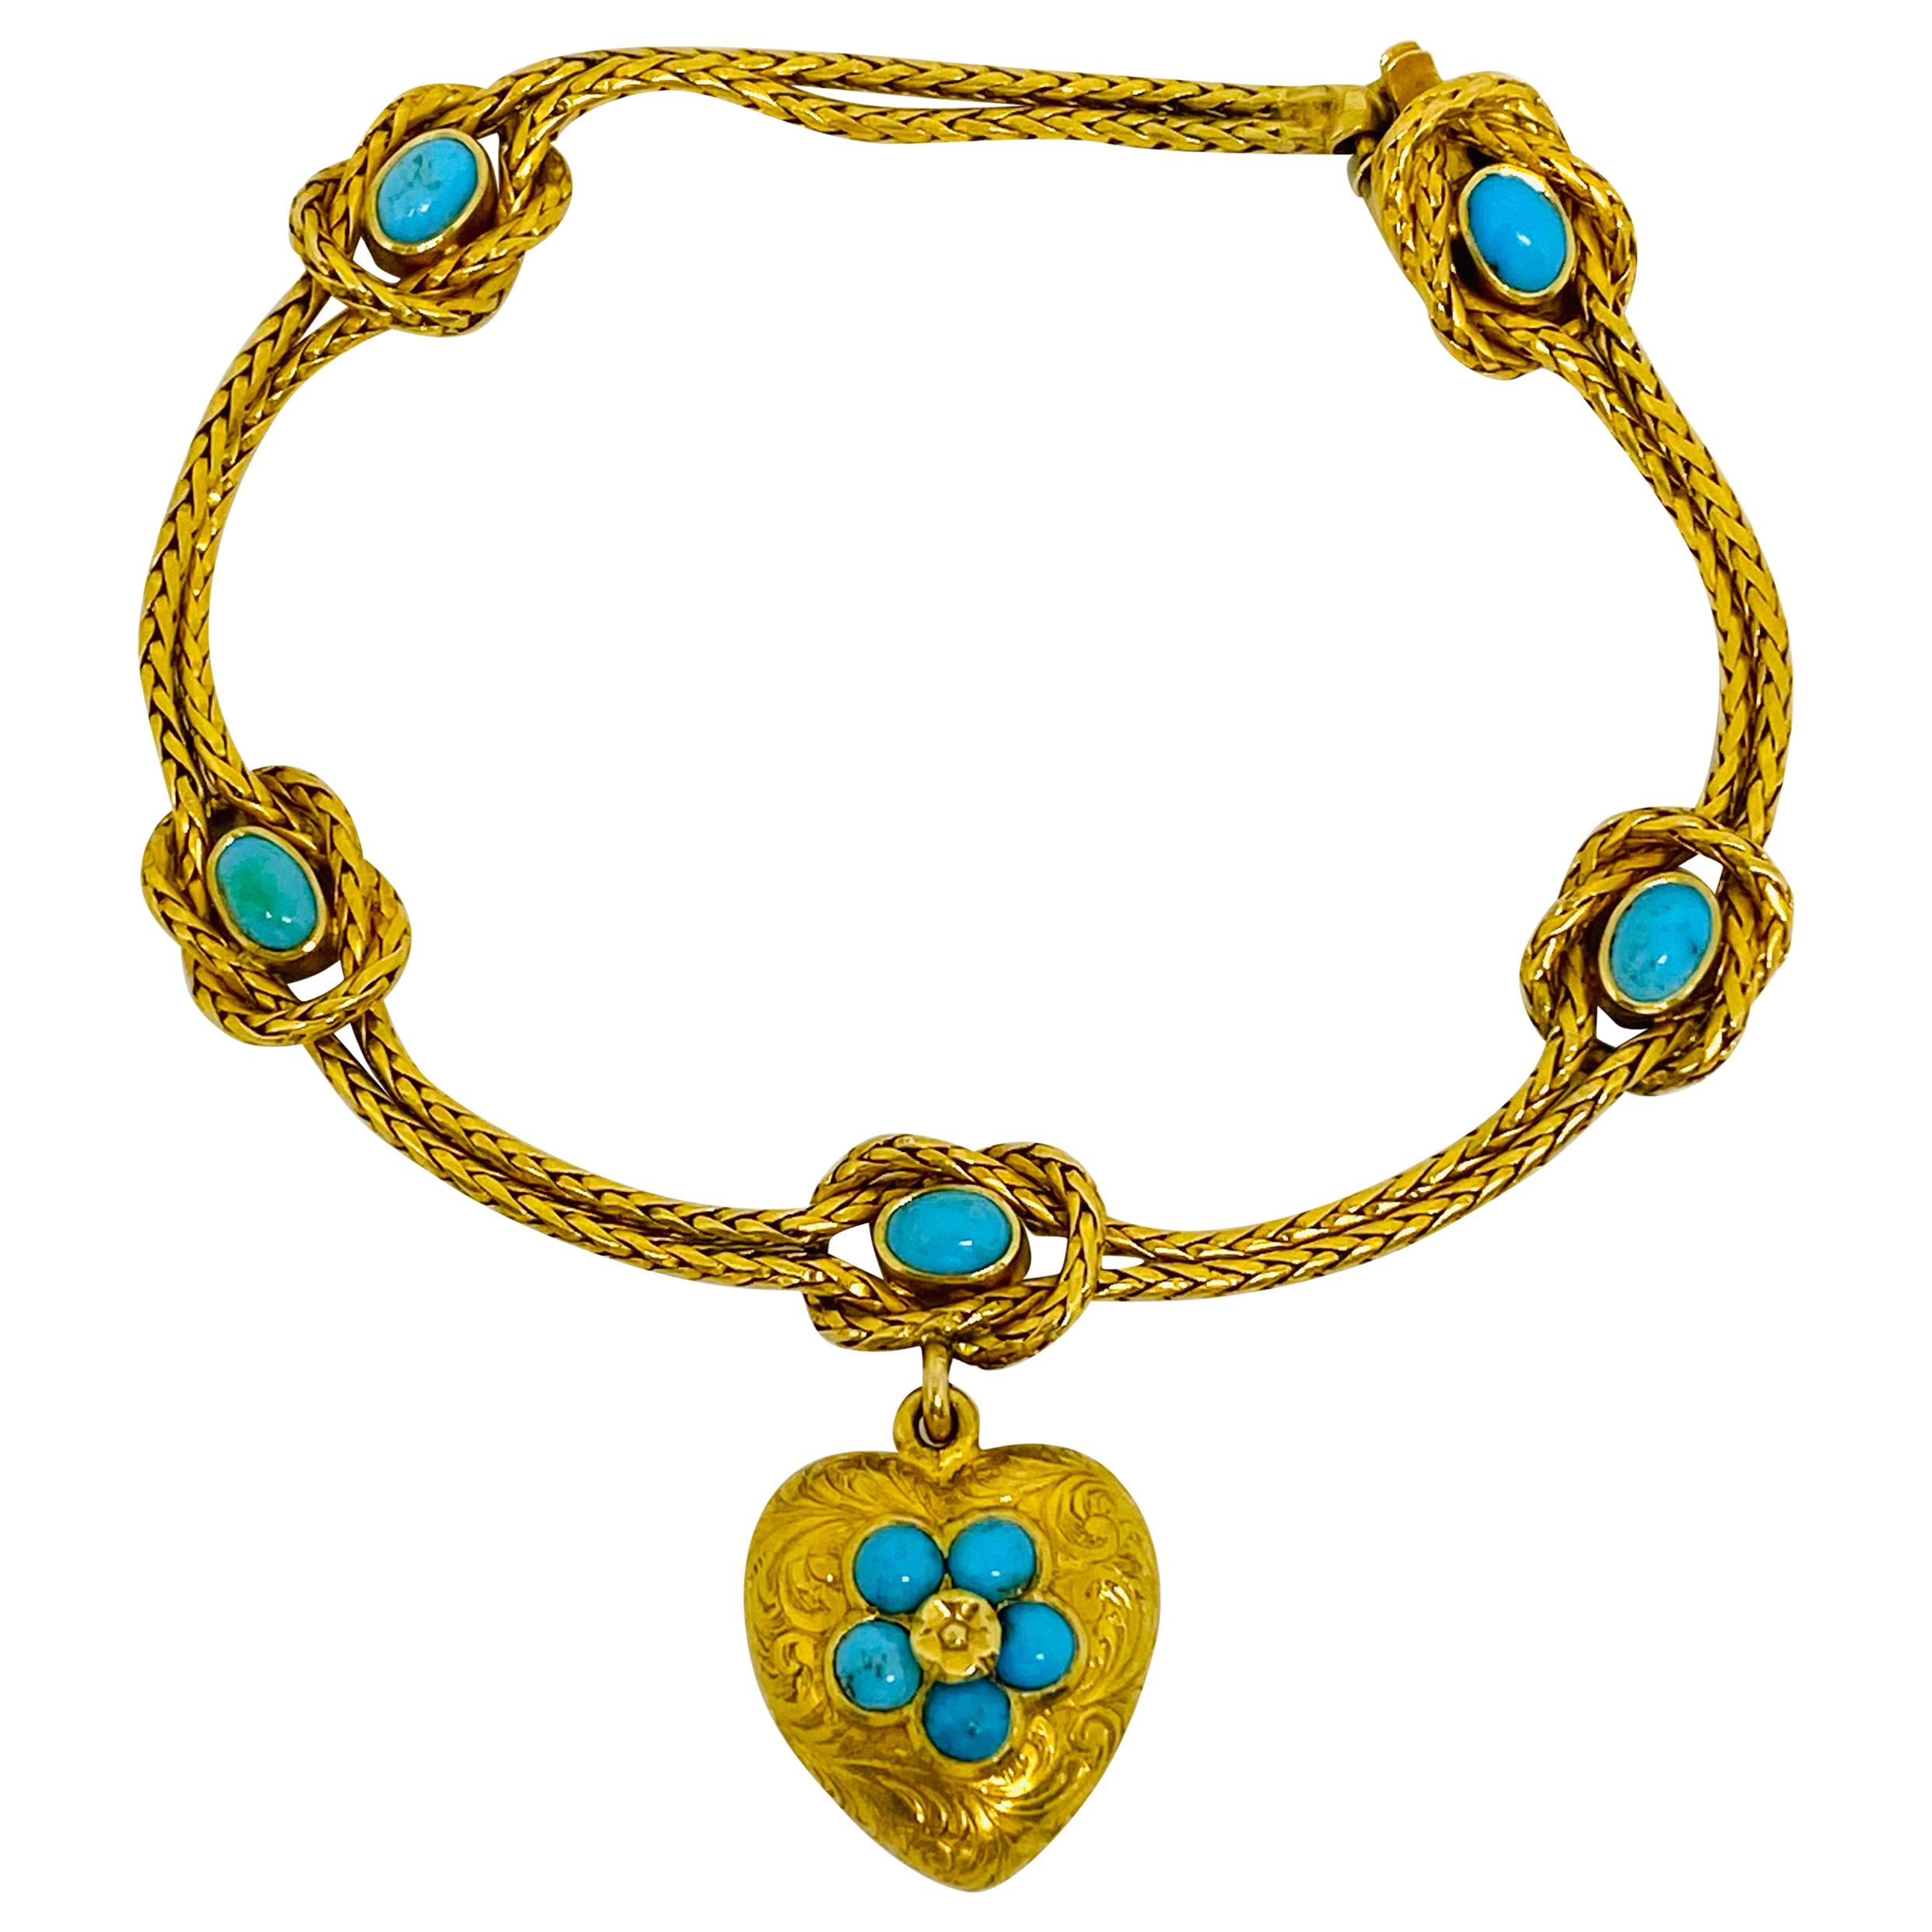 Antique Yellow Gold and Turquoise Bracelet w/ Heart Charm 